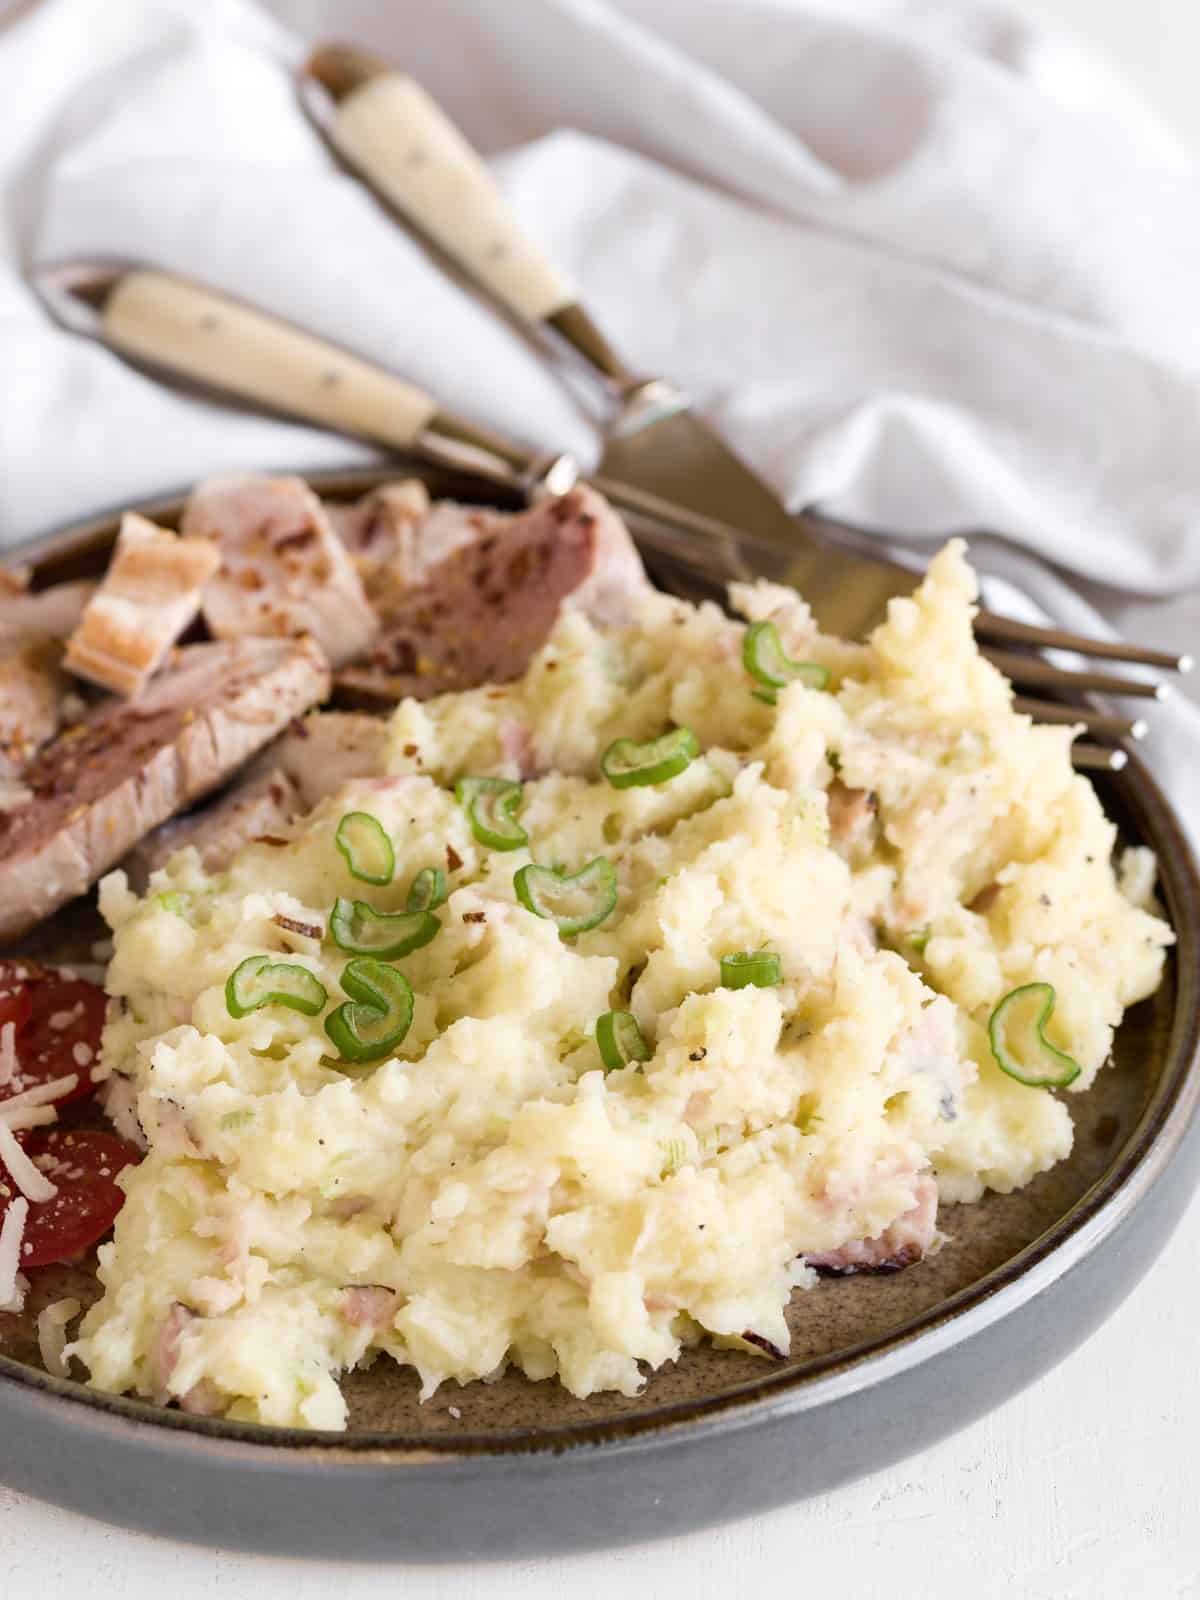 Chunky mashed potatoes served with meat.